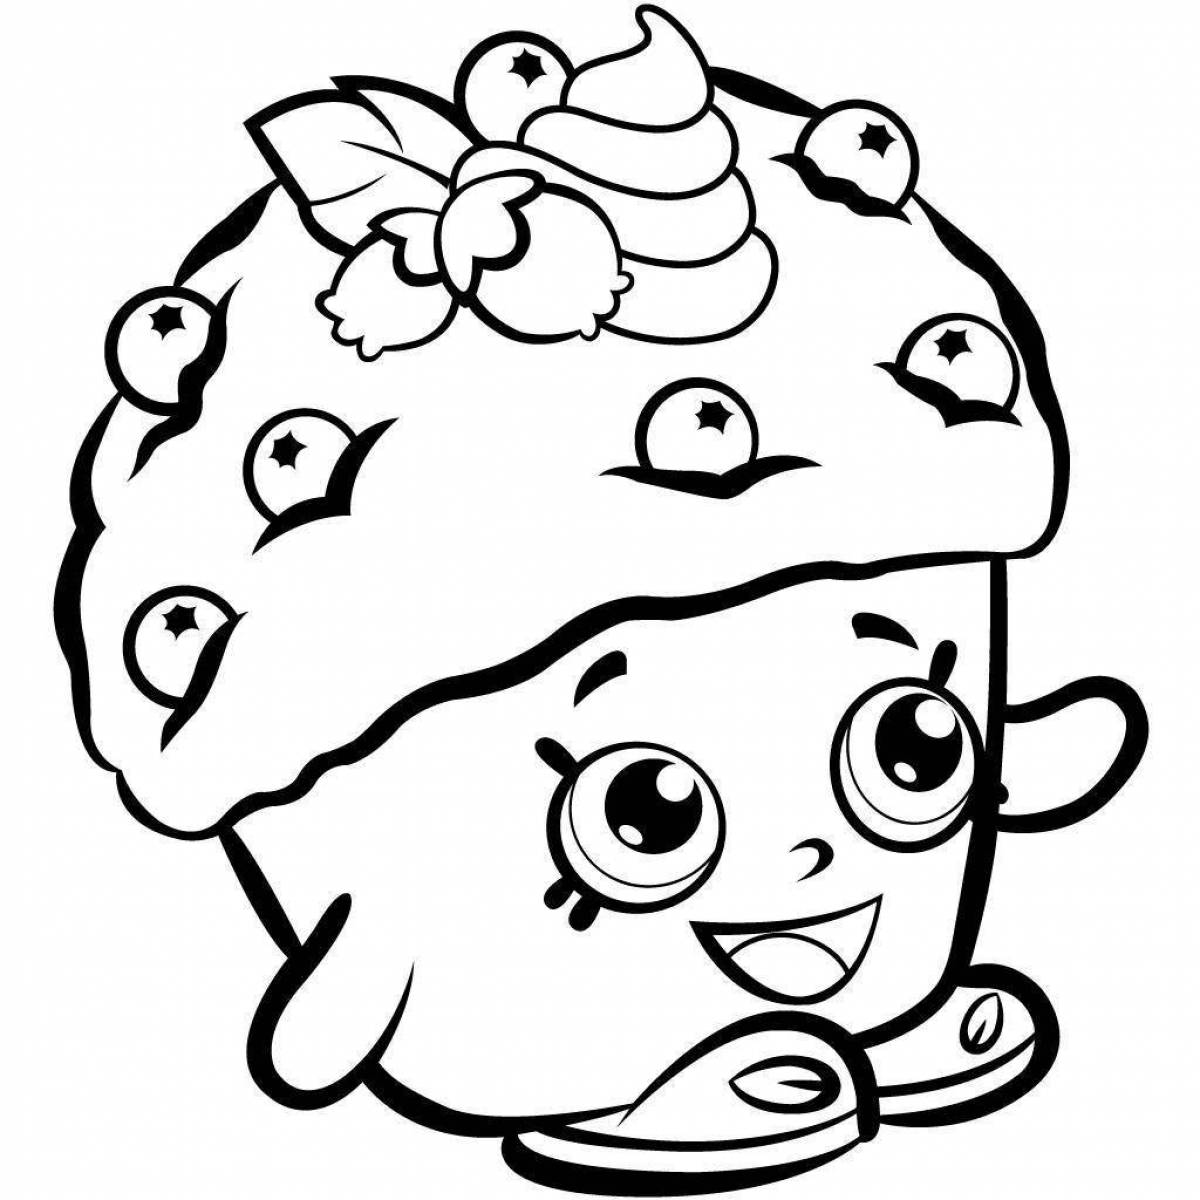 Shopkins colorful coloring pages for kids